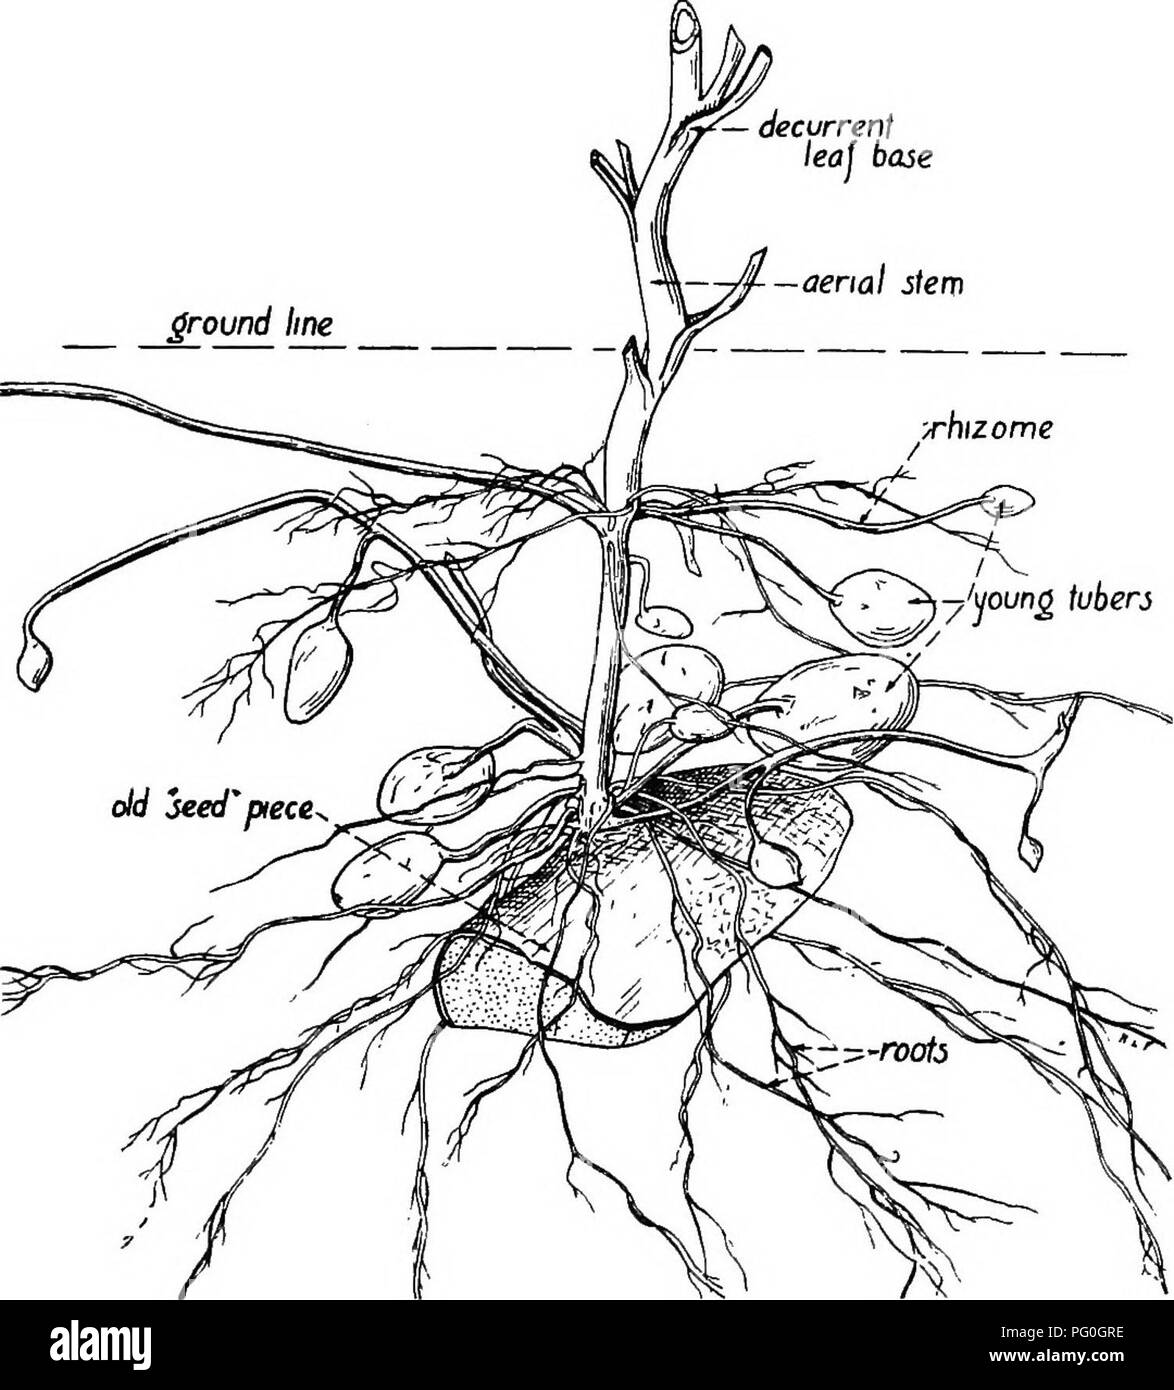 . The botany of crop plants : a text and reference book. Botany, Economic. 3° BOTANY OF CROP PLANTS stocks are broken into a number of separate pieces by cultivating implements, each piece may develop adven- titious roots, establish itself, and send up leafy shoots. Fre- quent cultivation that has as its aim the destruction of new. Fig. 12.—Portion of a sprouting potato tuber. shoots as soon as they appear, may succeed in starving out the rootstock after a time. The period of time depends upon the amount of stored food material in the structure. This method of eradication is based upon the kno Stock Photo